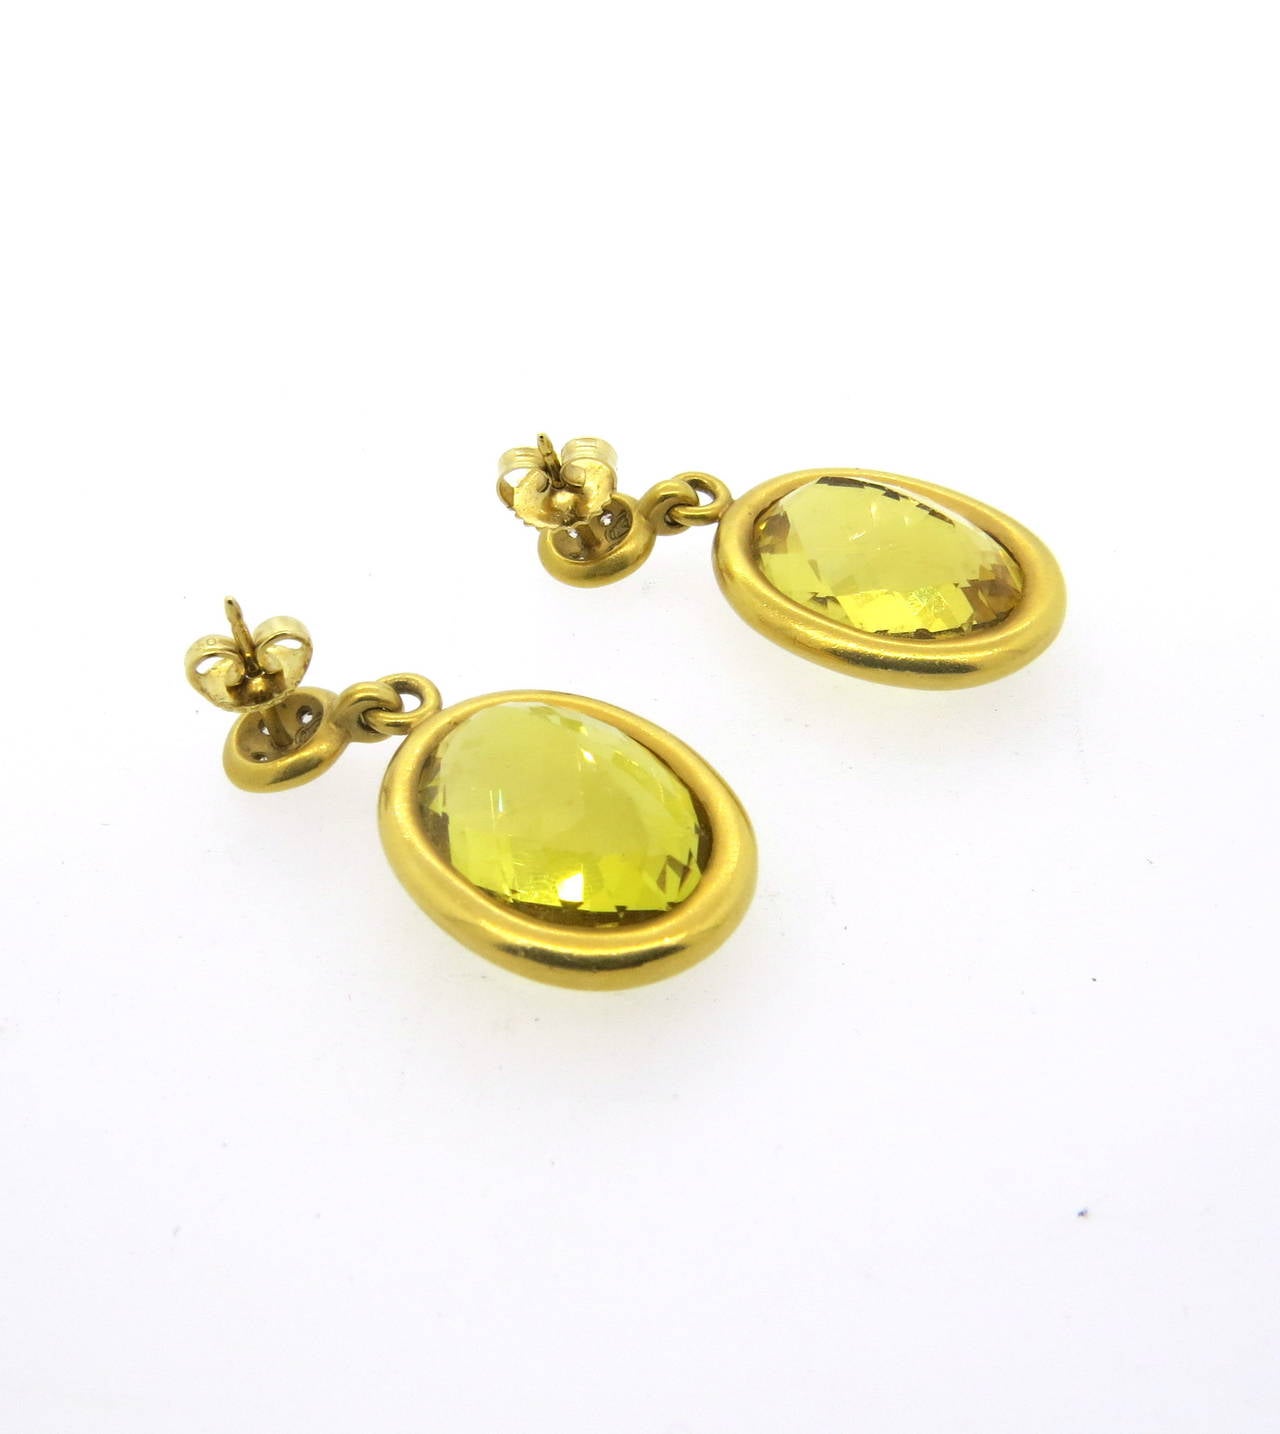 Lovely 18K gold earrings by Linda Lee Johnson featuring brilliant cirtrine drops accented by approximately 0.40ctw of diamonds. Earrings measure 35mm long x 18mm at widest points. Marked with makers hallmark, weigh 19.5 grams.